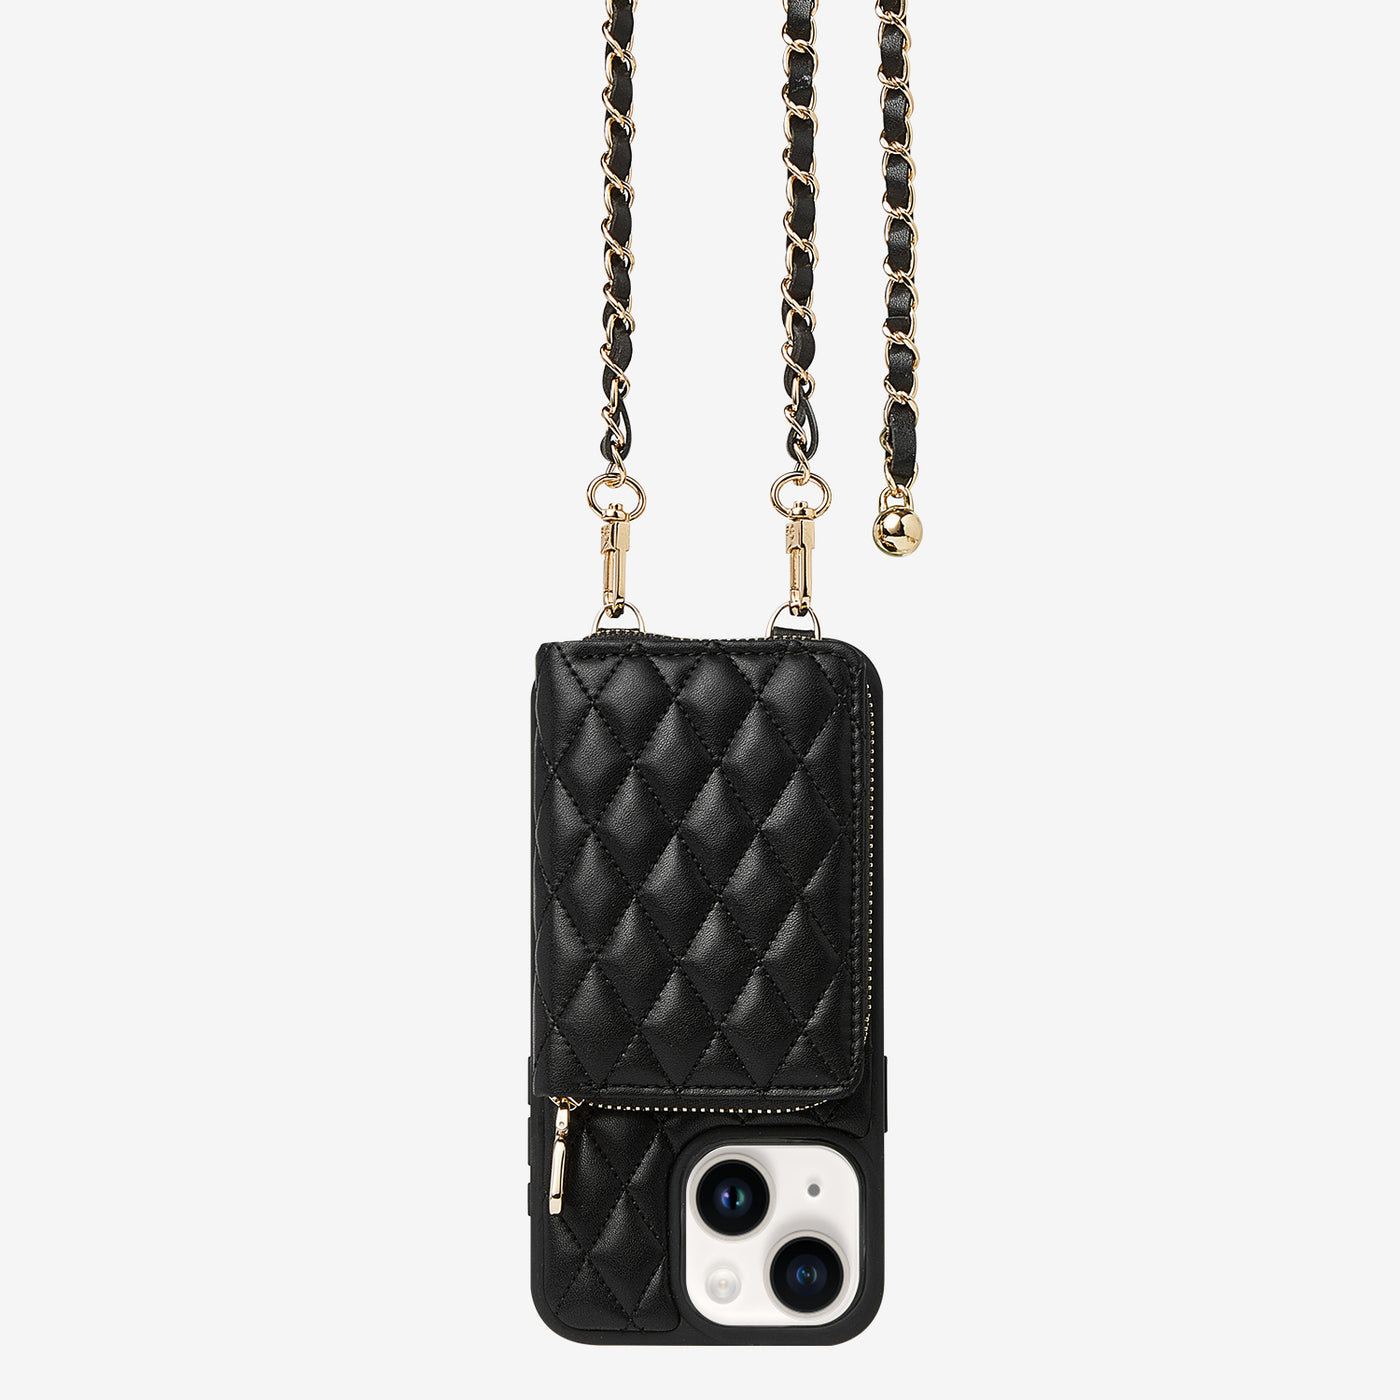 LuxeCharm- Argyle Phone Case with Chain Strap with adjustble Wrist band